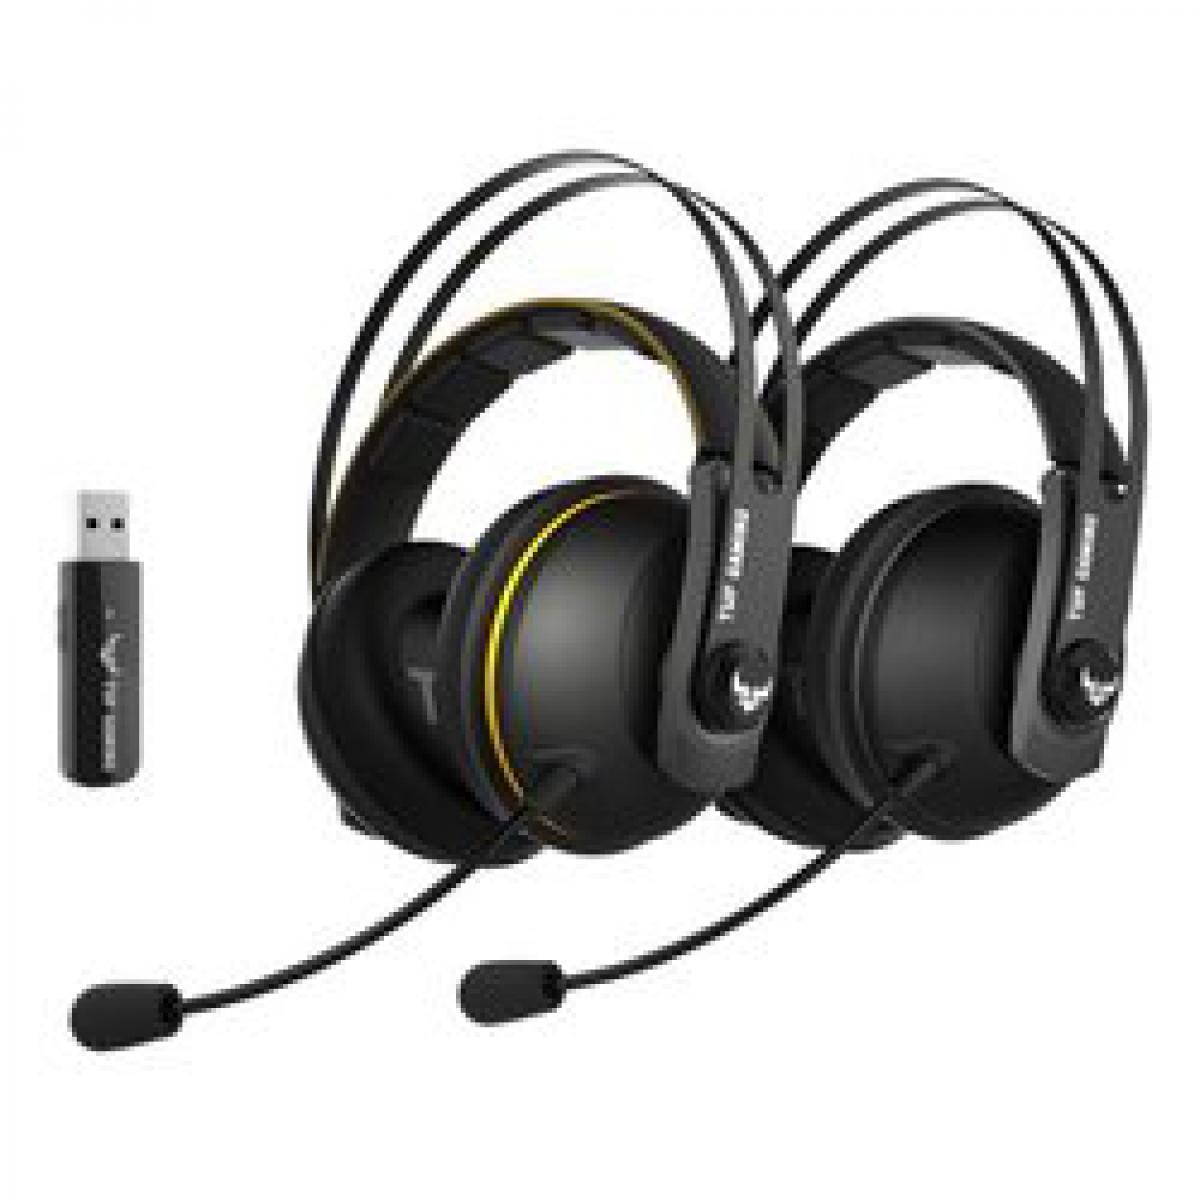 Asus - Cuffie gaming Asus TUF Gaming H7 Wireless - Ecouteurs intra-auriculaires